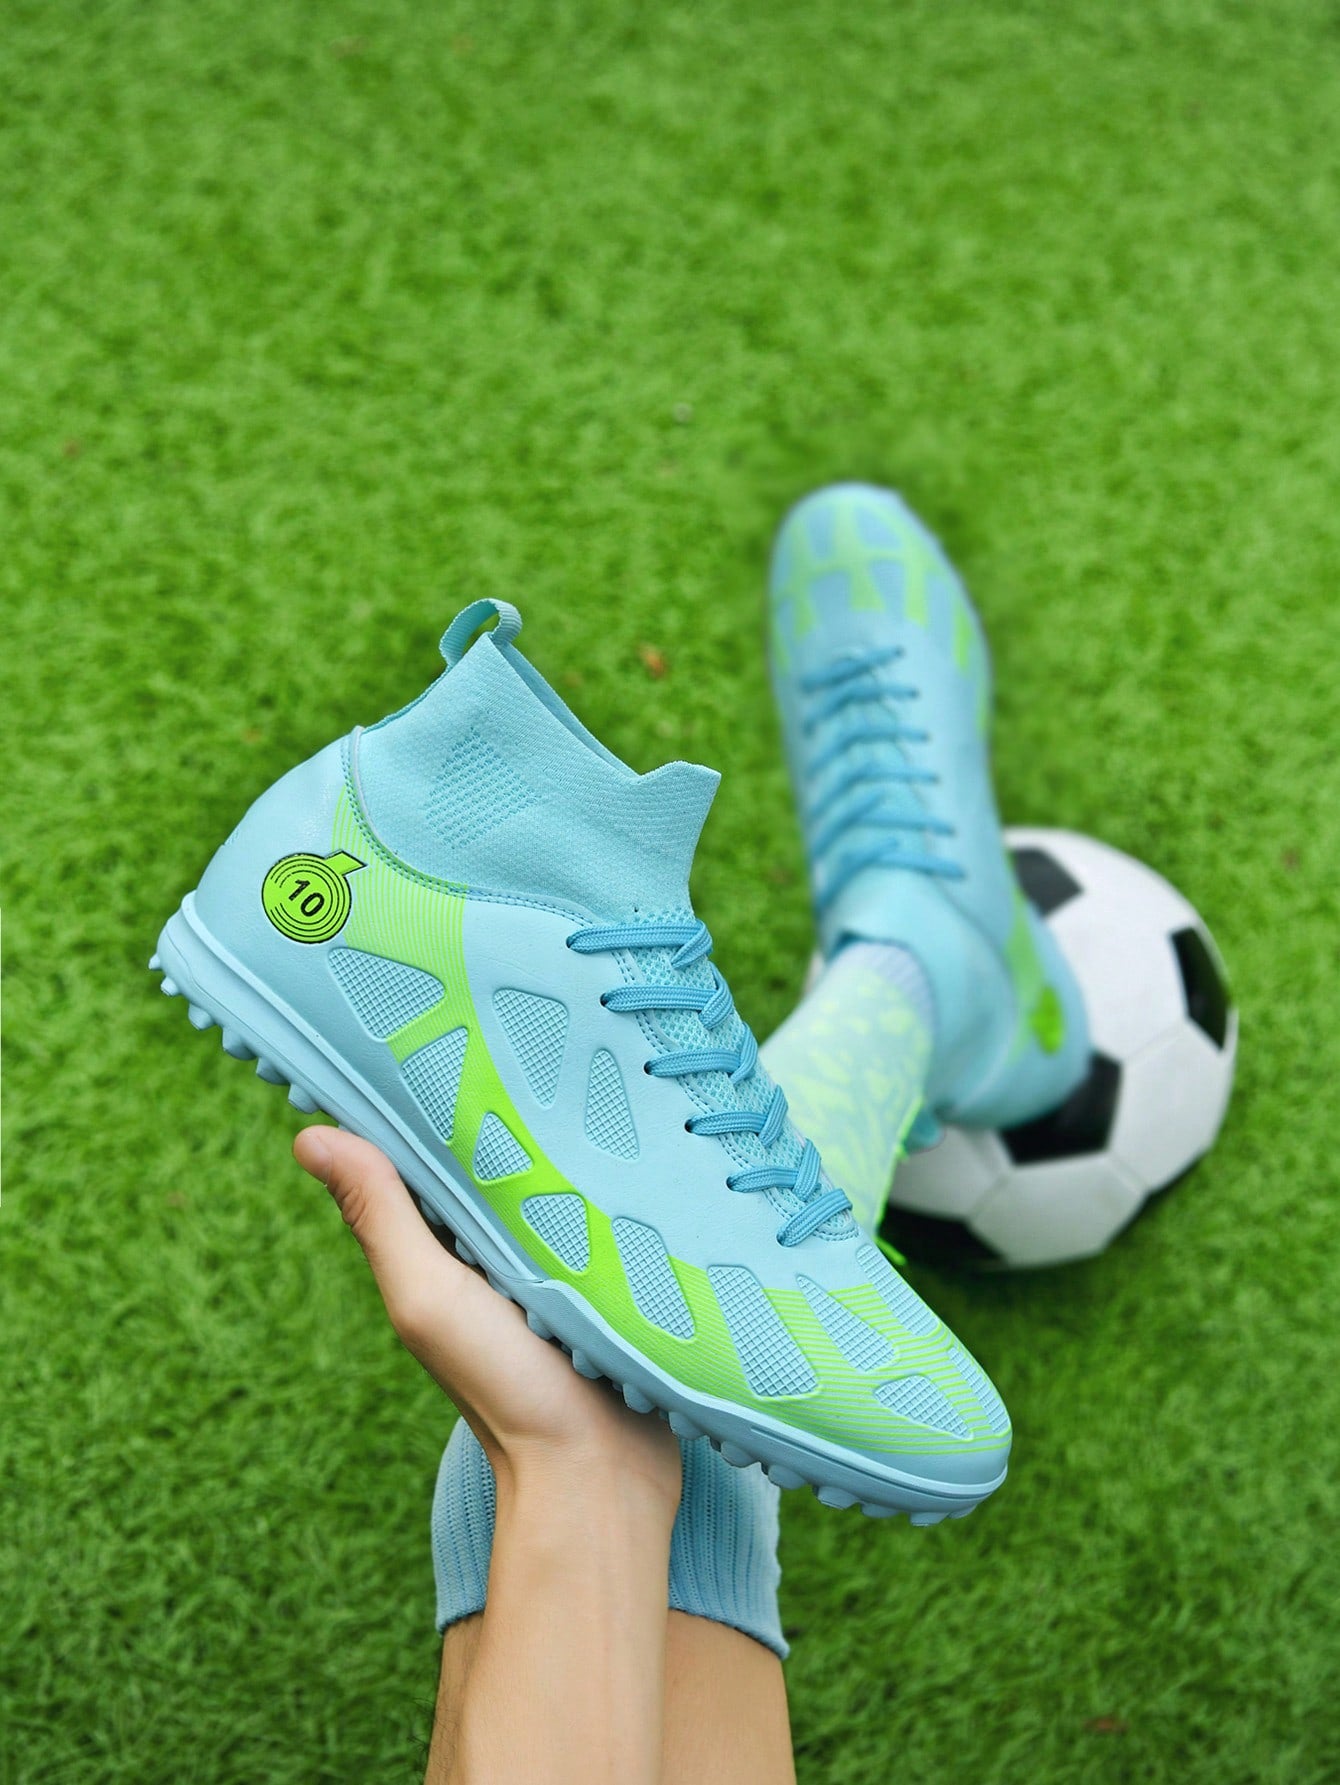 1pair Rubber Sole Anti-Slip Wear-Resistant Breathable Unisex Football Shoes With Printed Decoration And Studs Ronaldo  Cleats